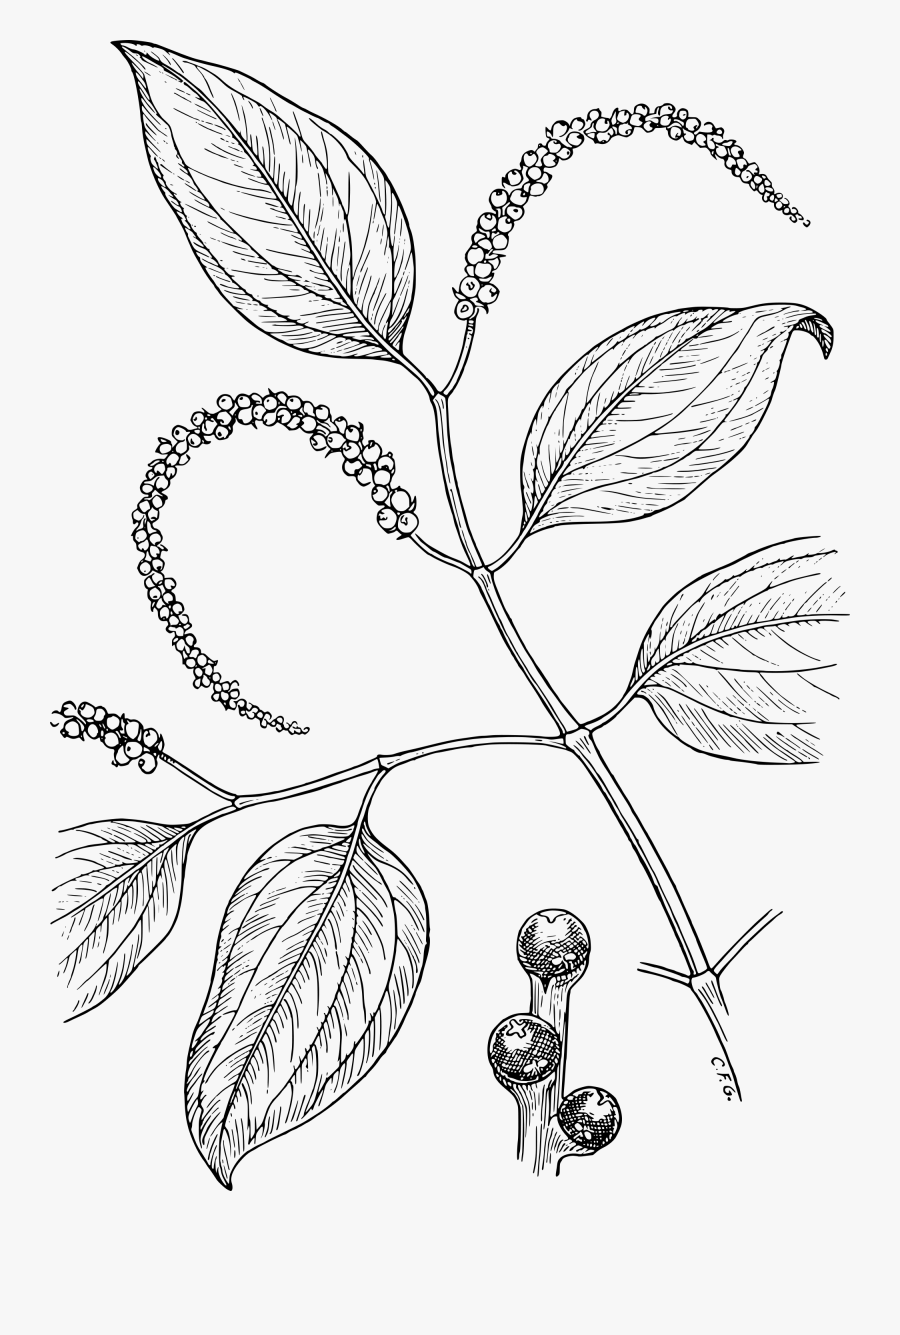 Transparent Pepper Clipart Black And White - Piper Nigrum Plant Drawing, Transparent Clipart